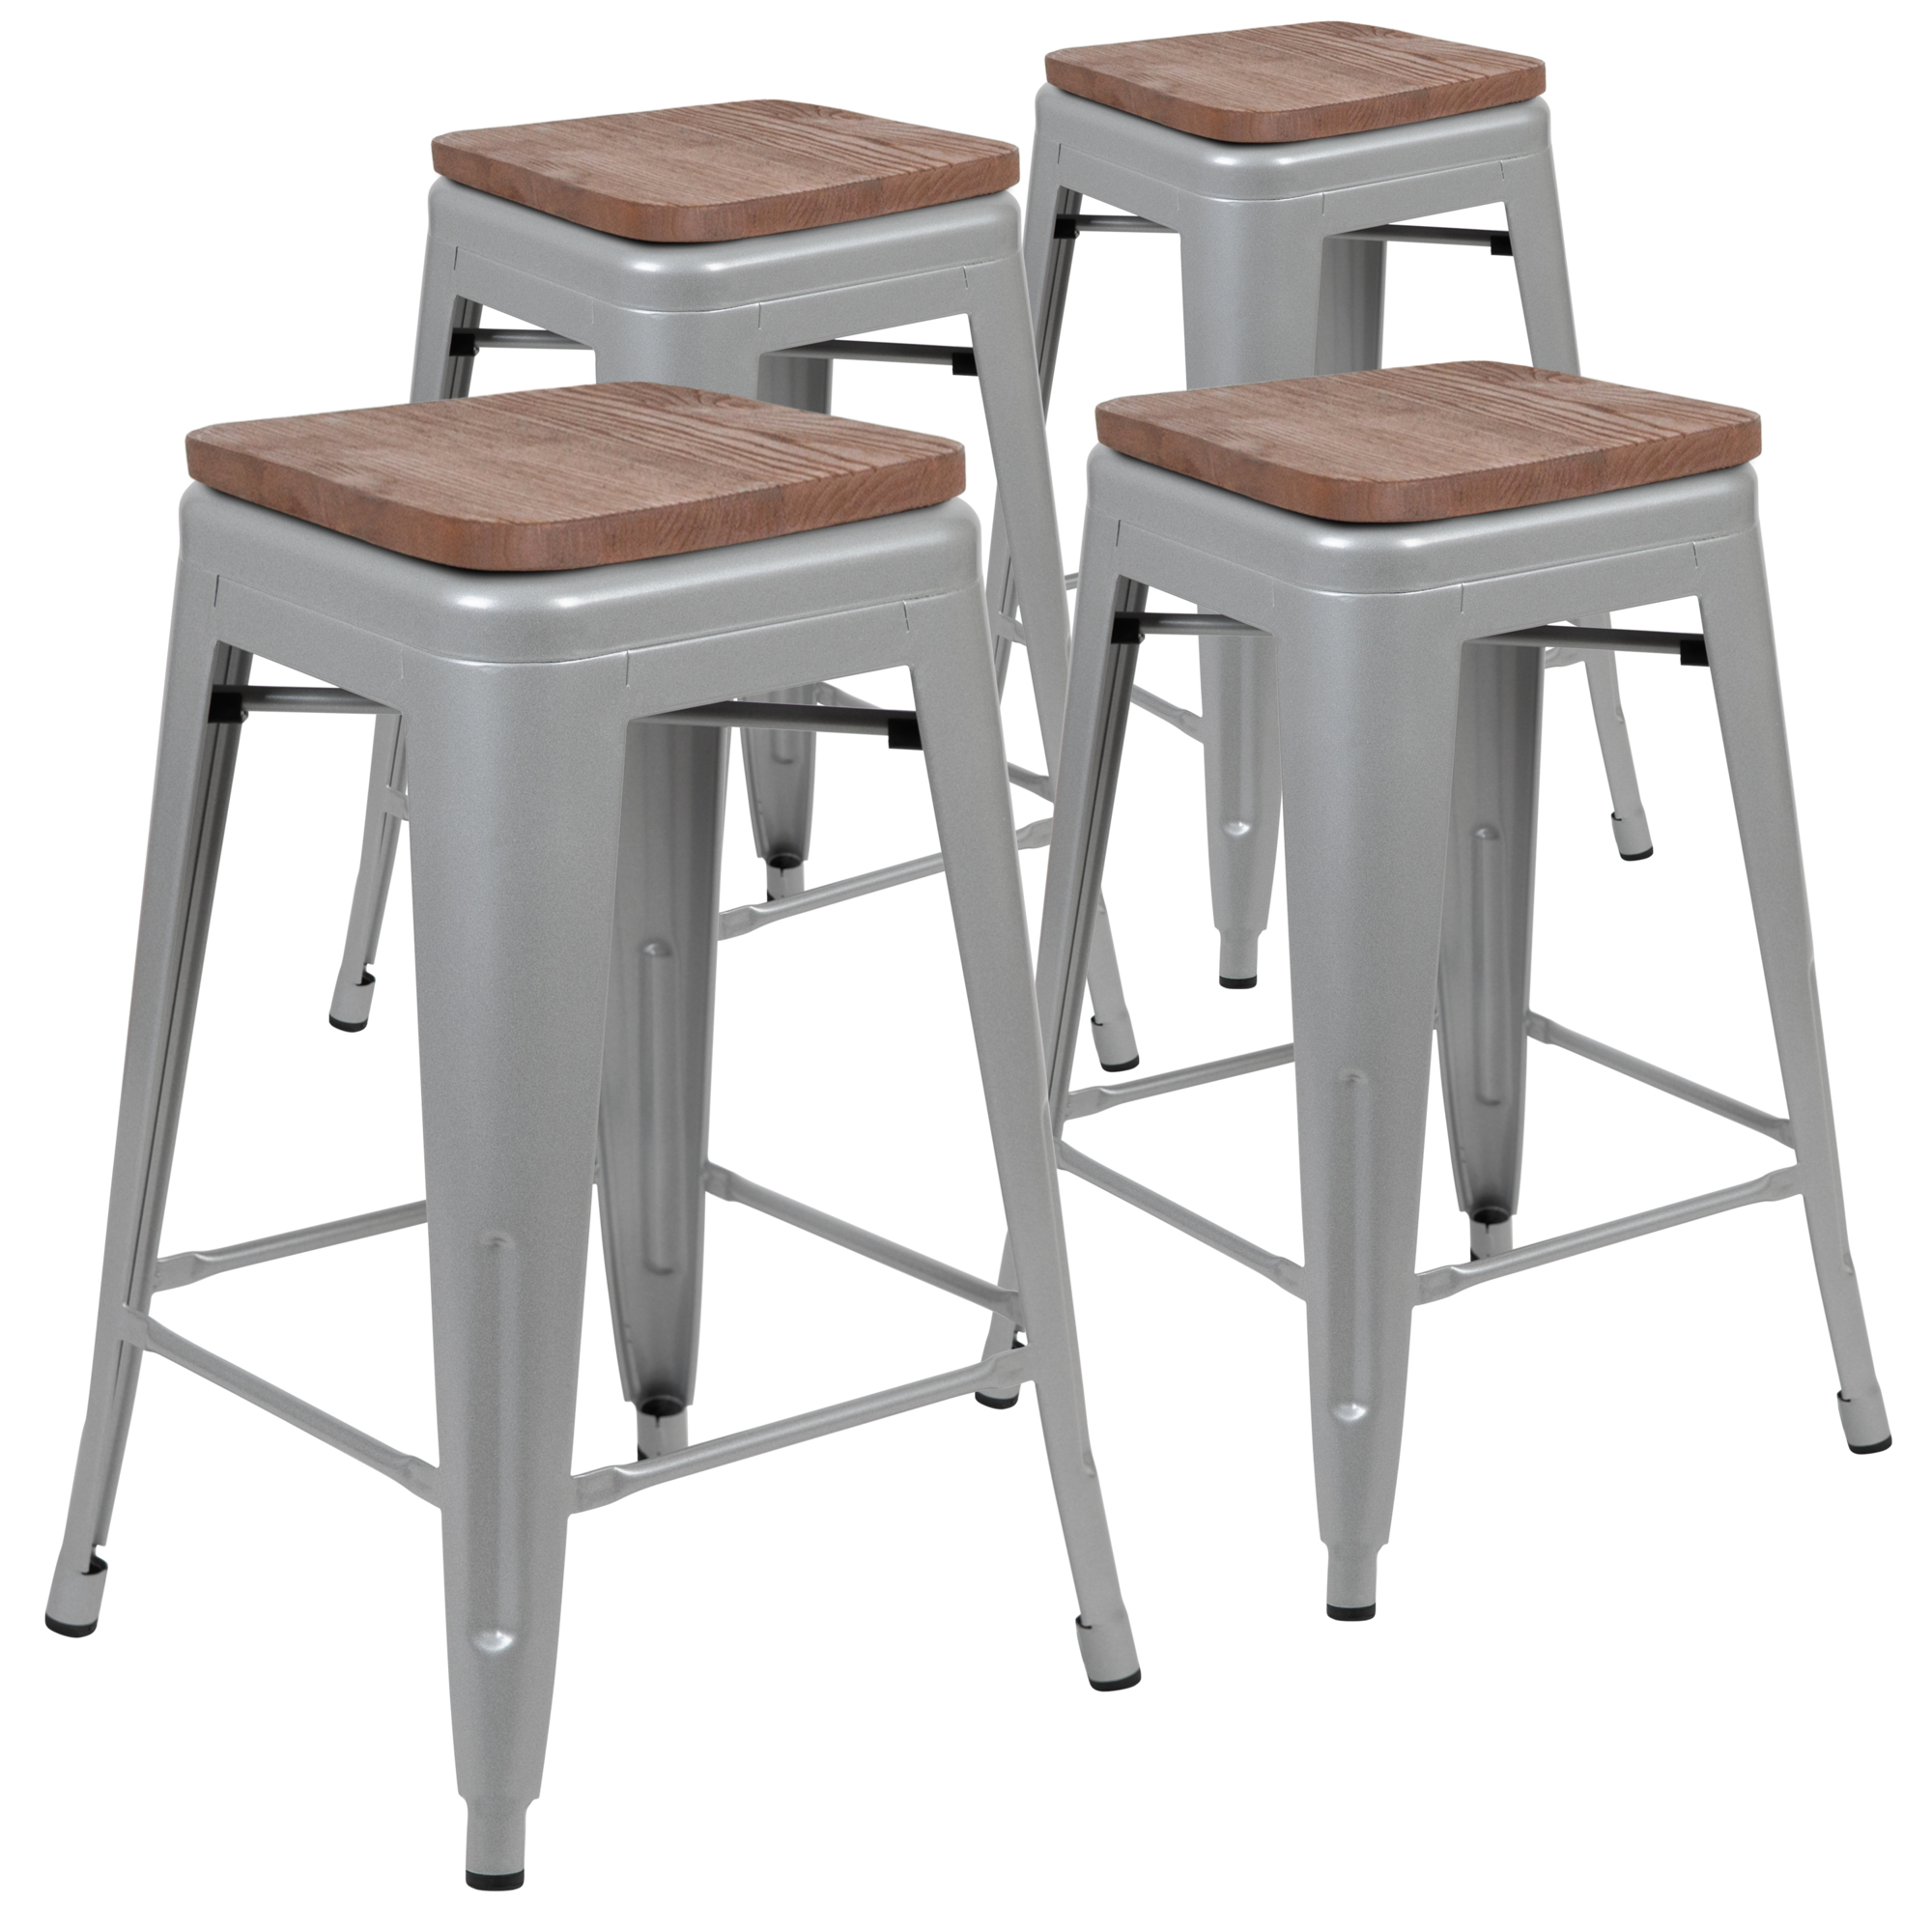 Flash Furniture, 4 Pack 24Inch High Metal Indoor Counter Stool, Silver, Primary Color Gray, Included (qty.) 4, Model 4ET31320W24SVR